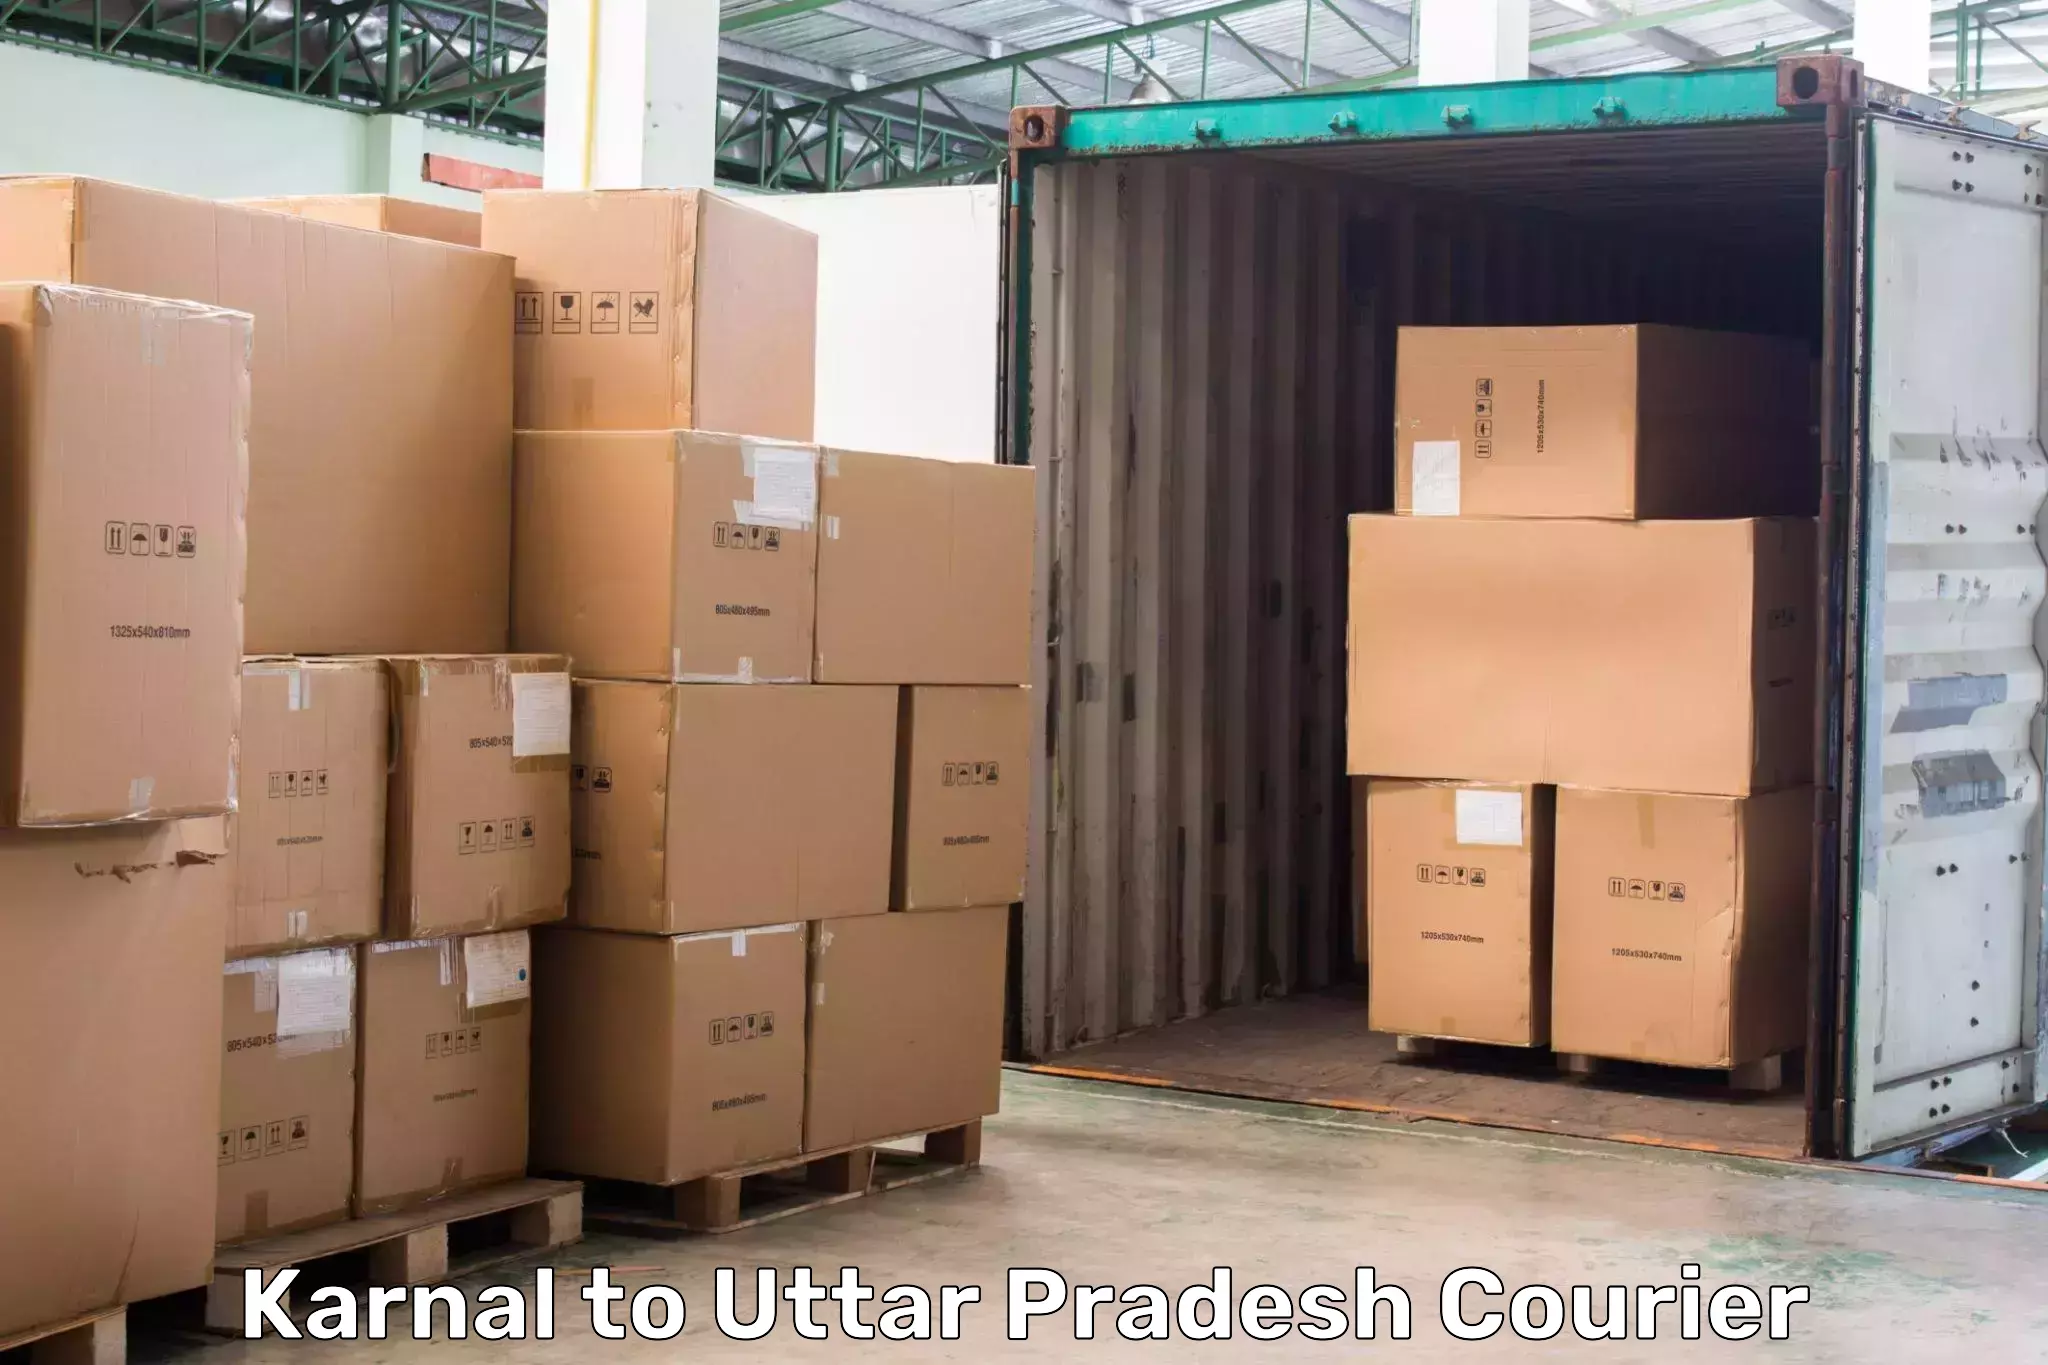 Efficient courier operations Karnal to Kannauj